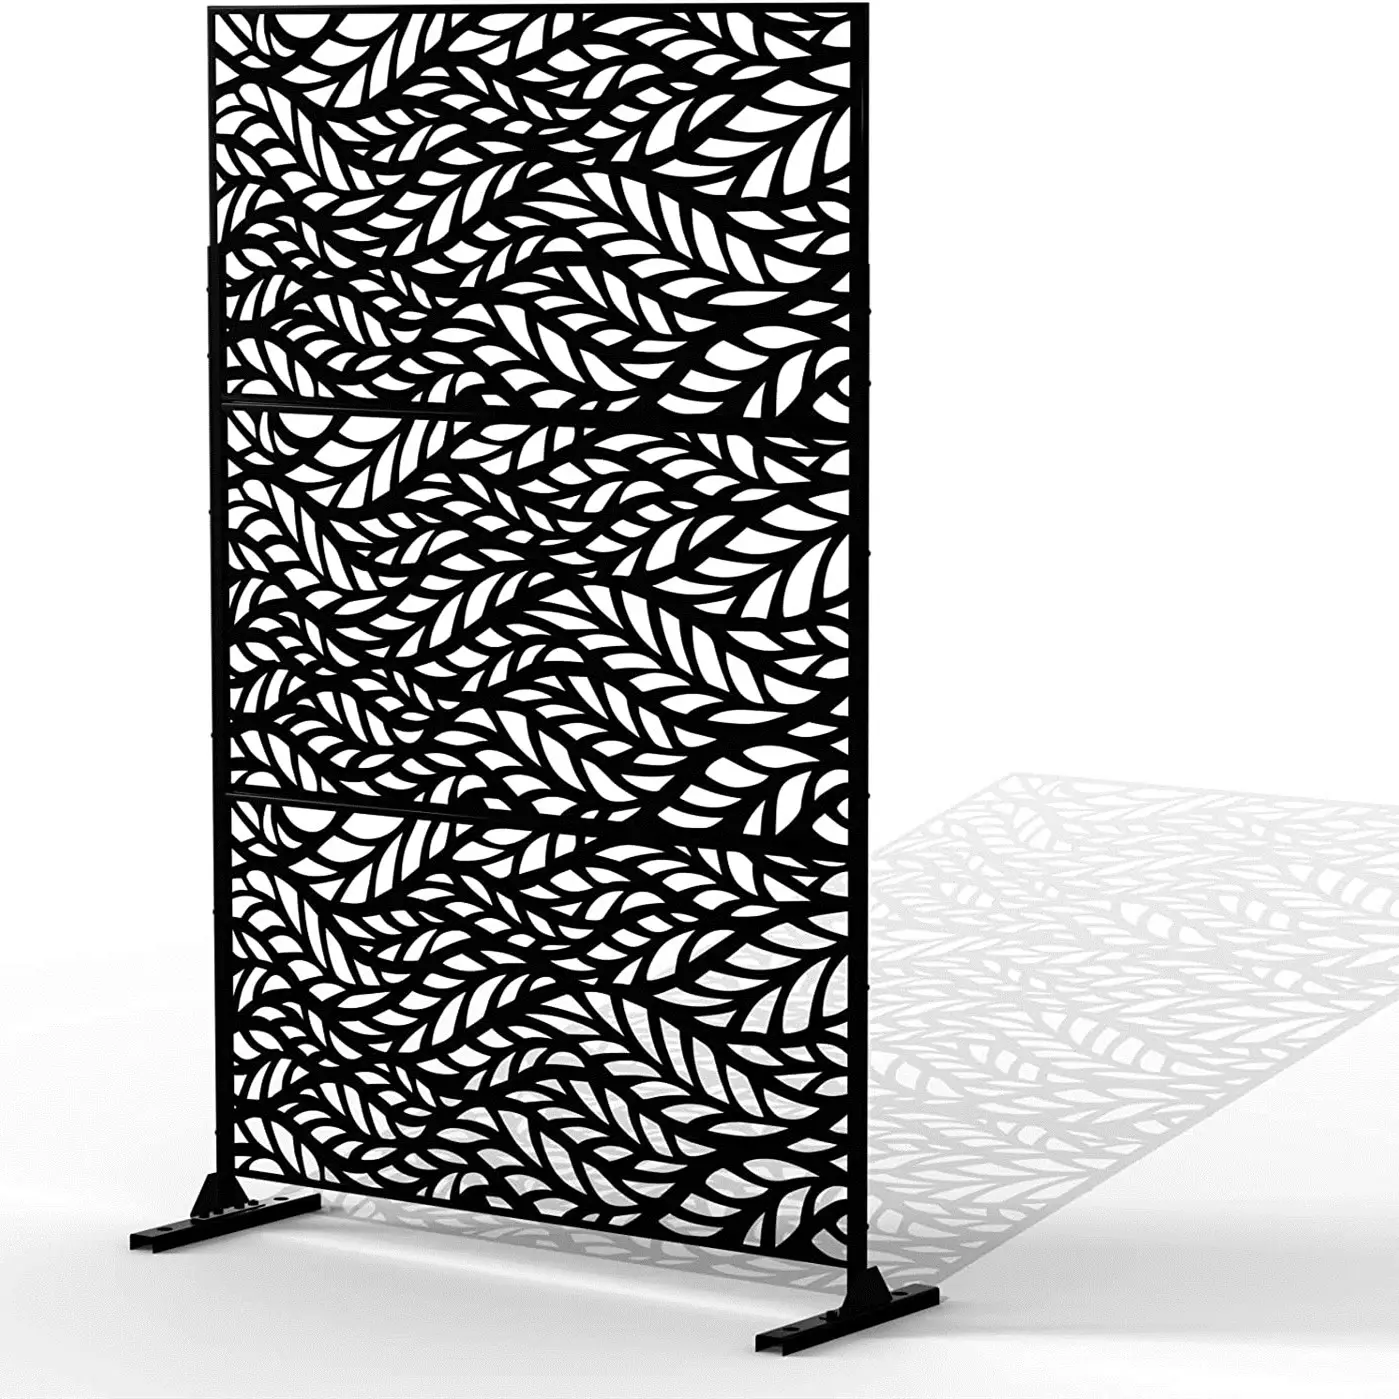 Laser Cut Decorative Steel Privacy Panel Screen Metal Fencing Hanging Room Divider Partitions Panel